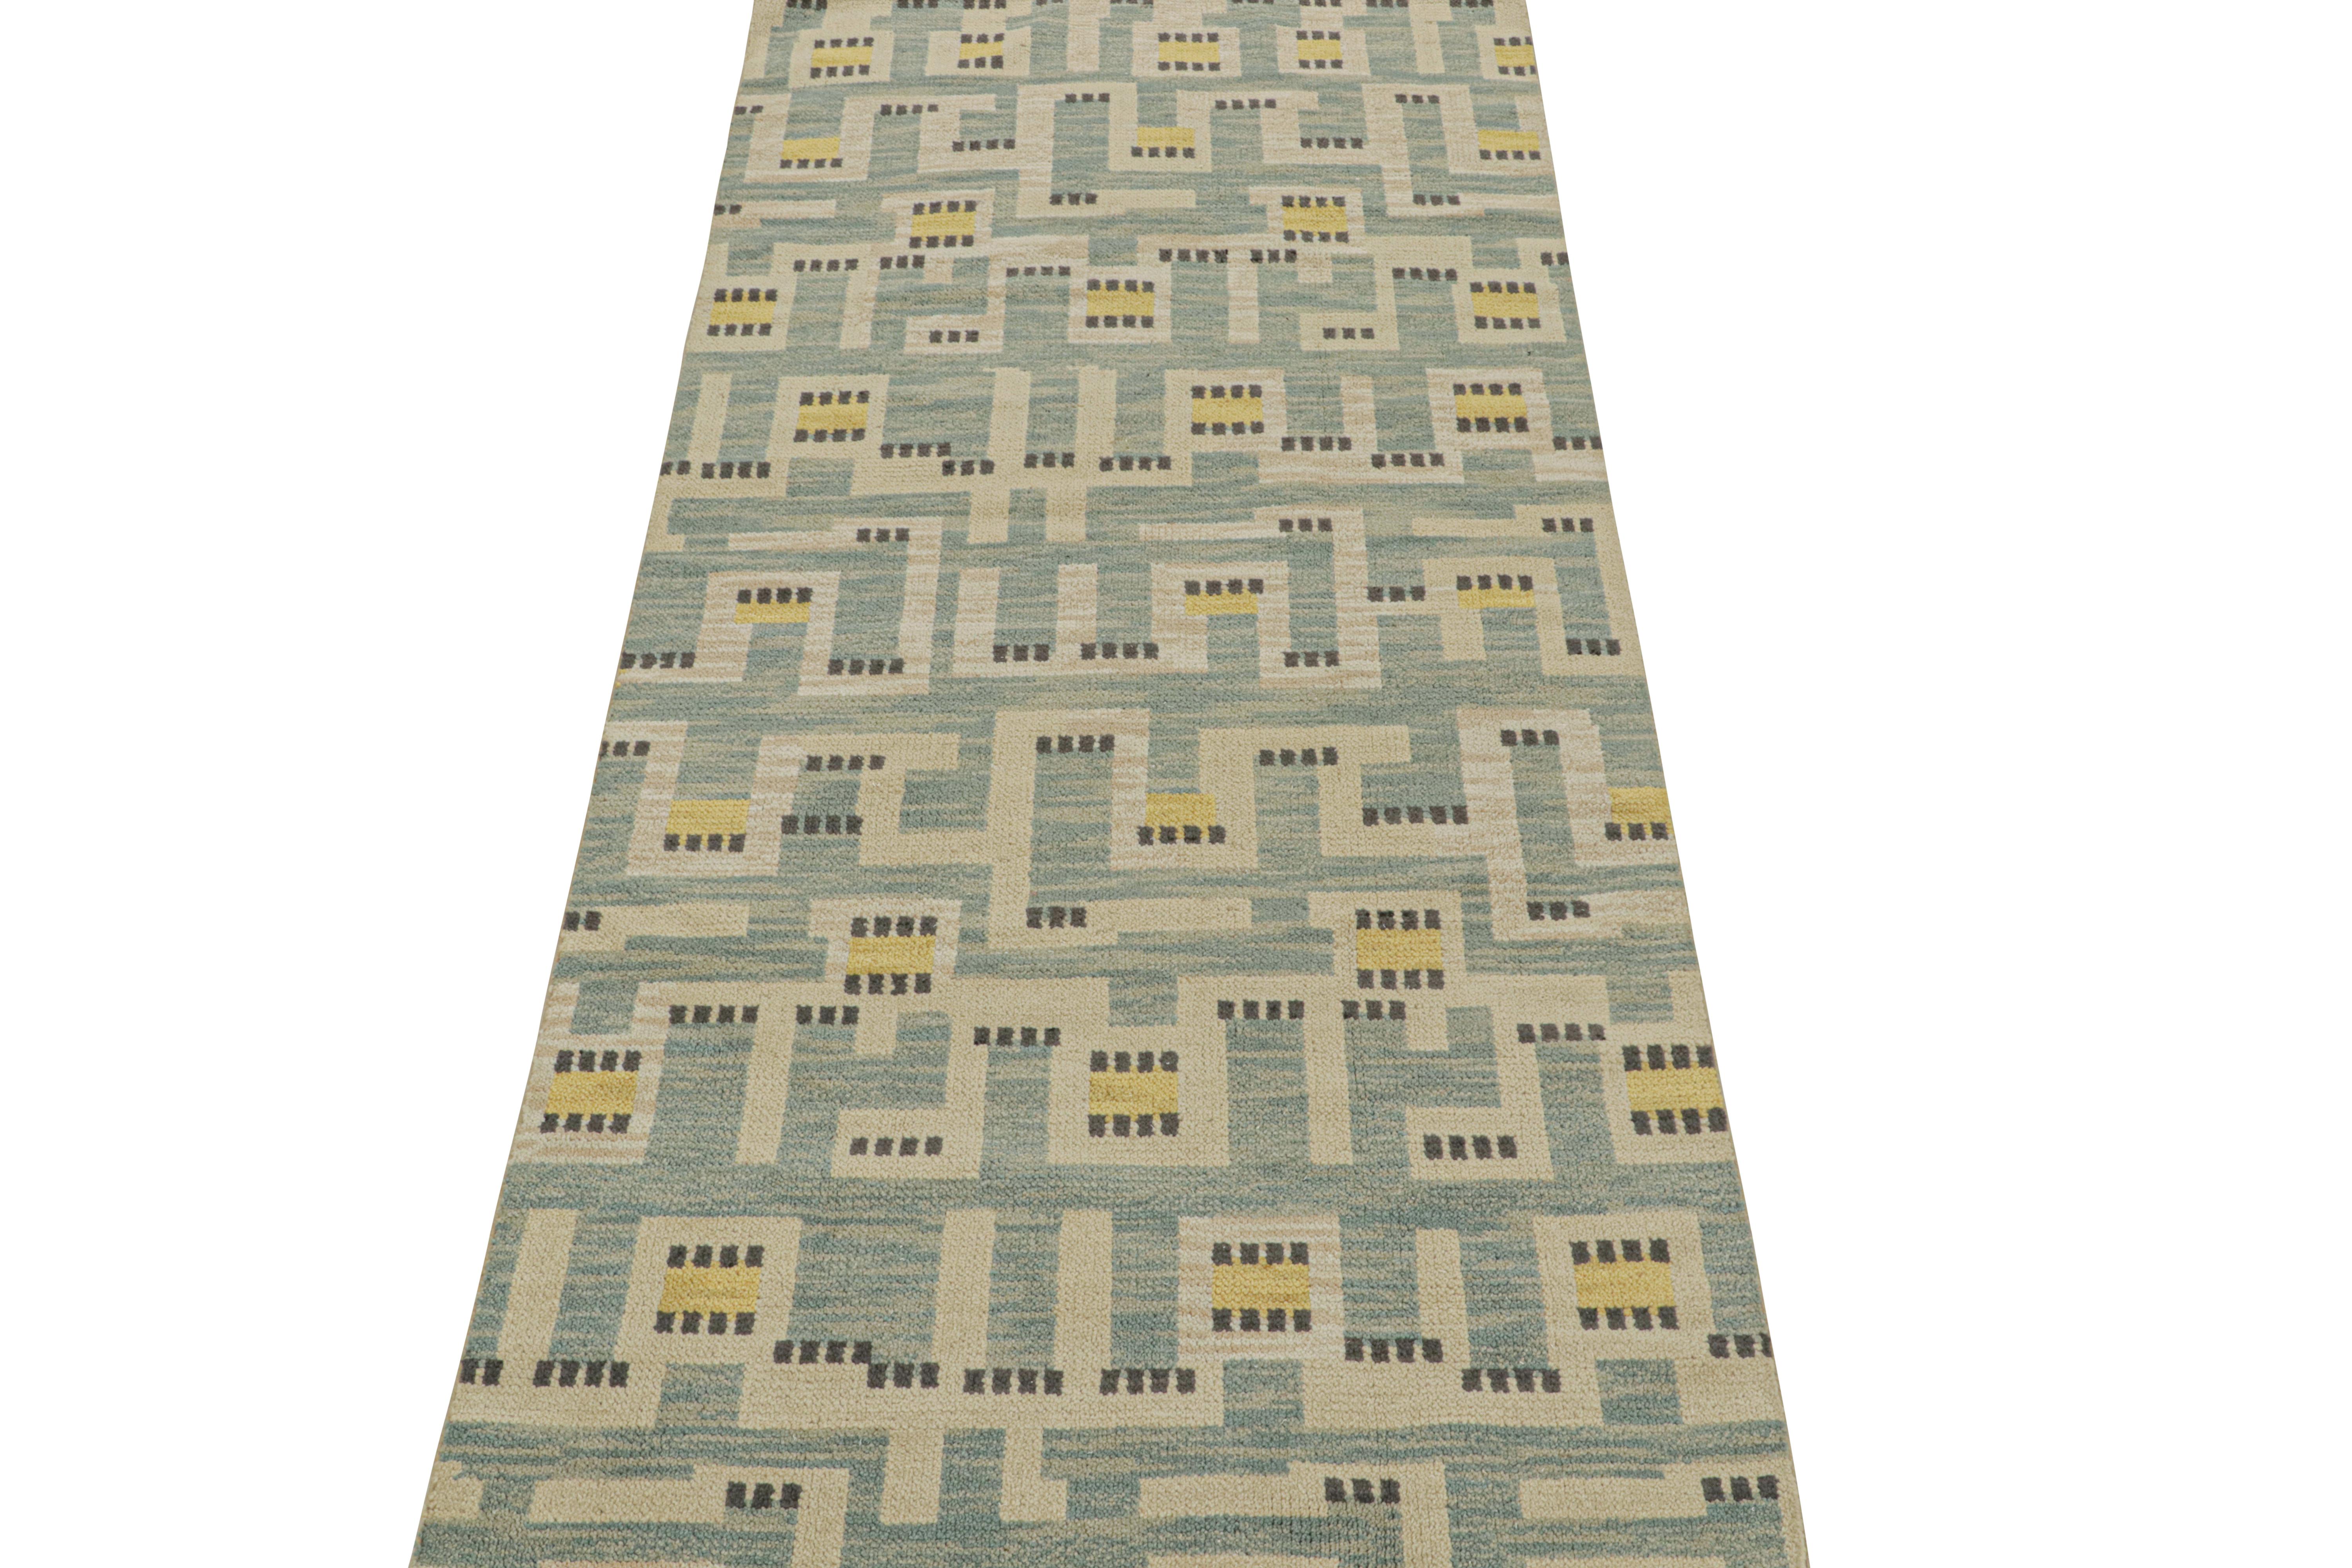 This 4x9 rug is a new addition to the Scandinavian Collection by Rug & Kilim. hand knotted in wool, its design reflects a contemporary take on Swedish Deco style.

Further On the Design: 

This new runner reinvents vintage Rya rug styles in ways